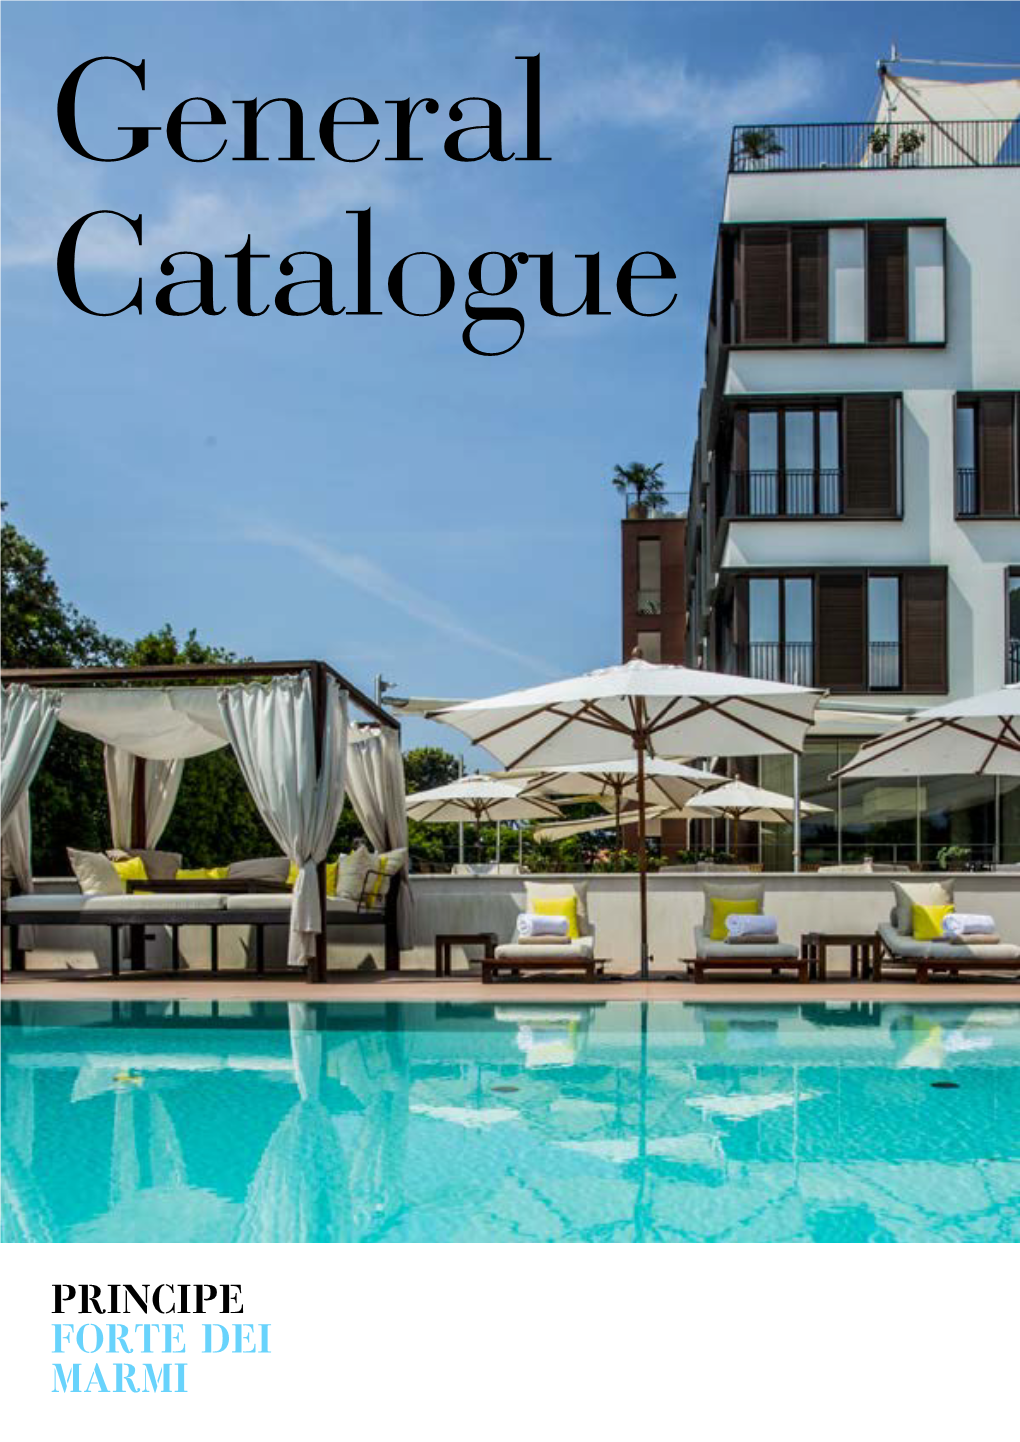 General Catalogue 02 FORTE DEI MARMI IS the MOST ENCHANTING TOWNS of VERSILIA and the MOST RENOWNED SEASIDE RESORT in TUSCANY